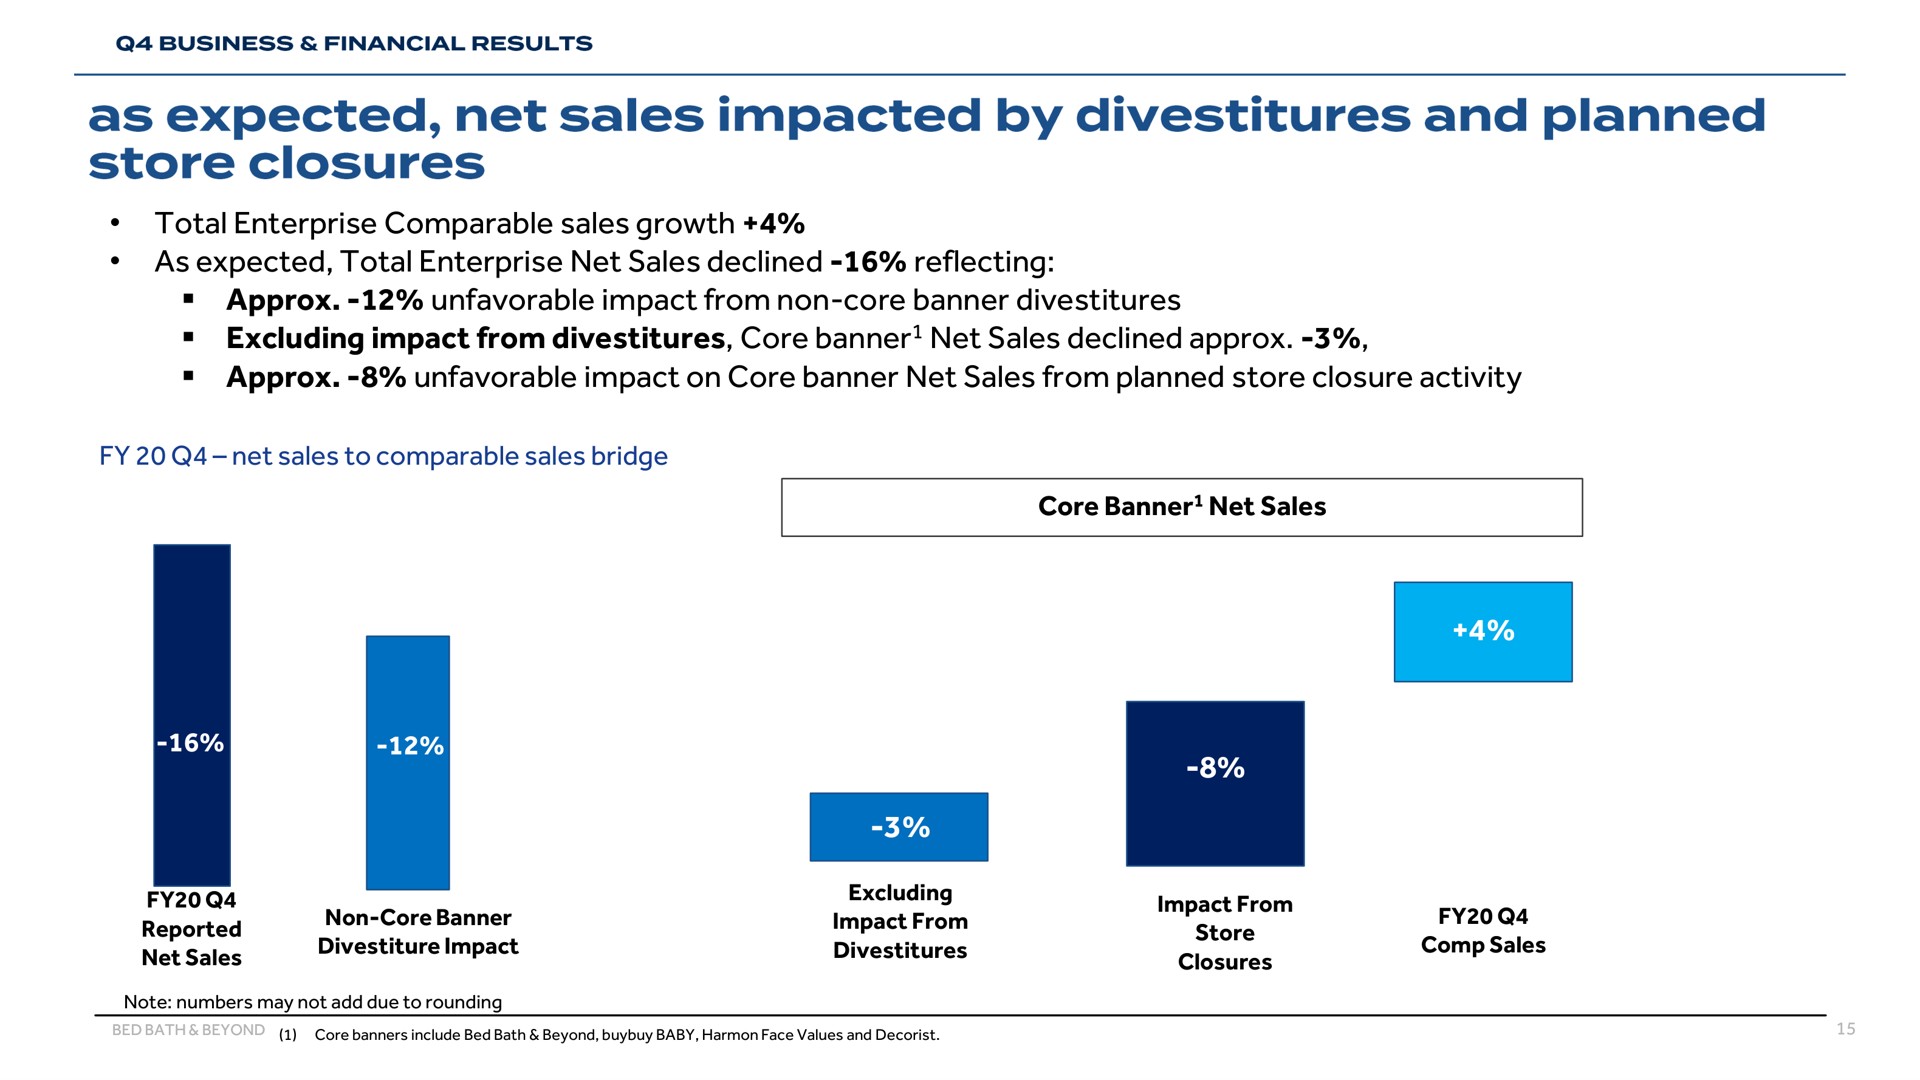 total enterprise comparable sales growth as expected total enterprise net sales declined reflecting unfavorable impact from non core banner divestitures excluding impact from divestitures core banner net sales declined unfavorable impact on core banner net sales from planned store closure activity impacted by and closures | Bed Bath & Beyond